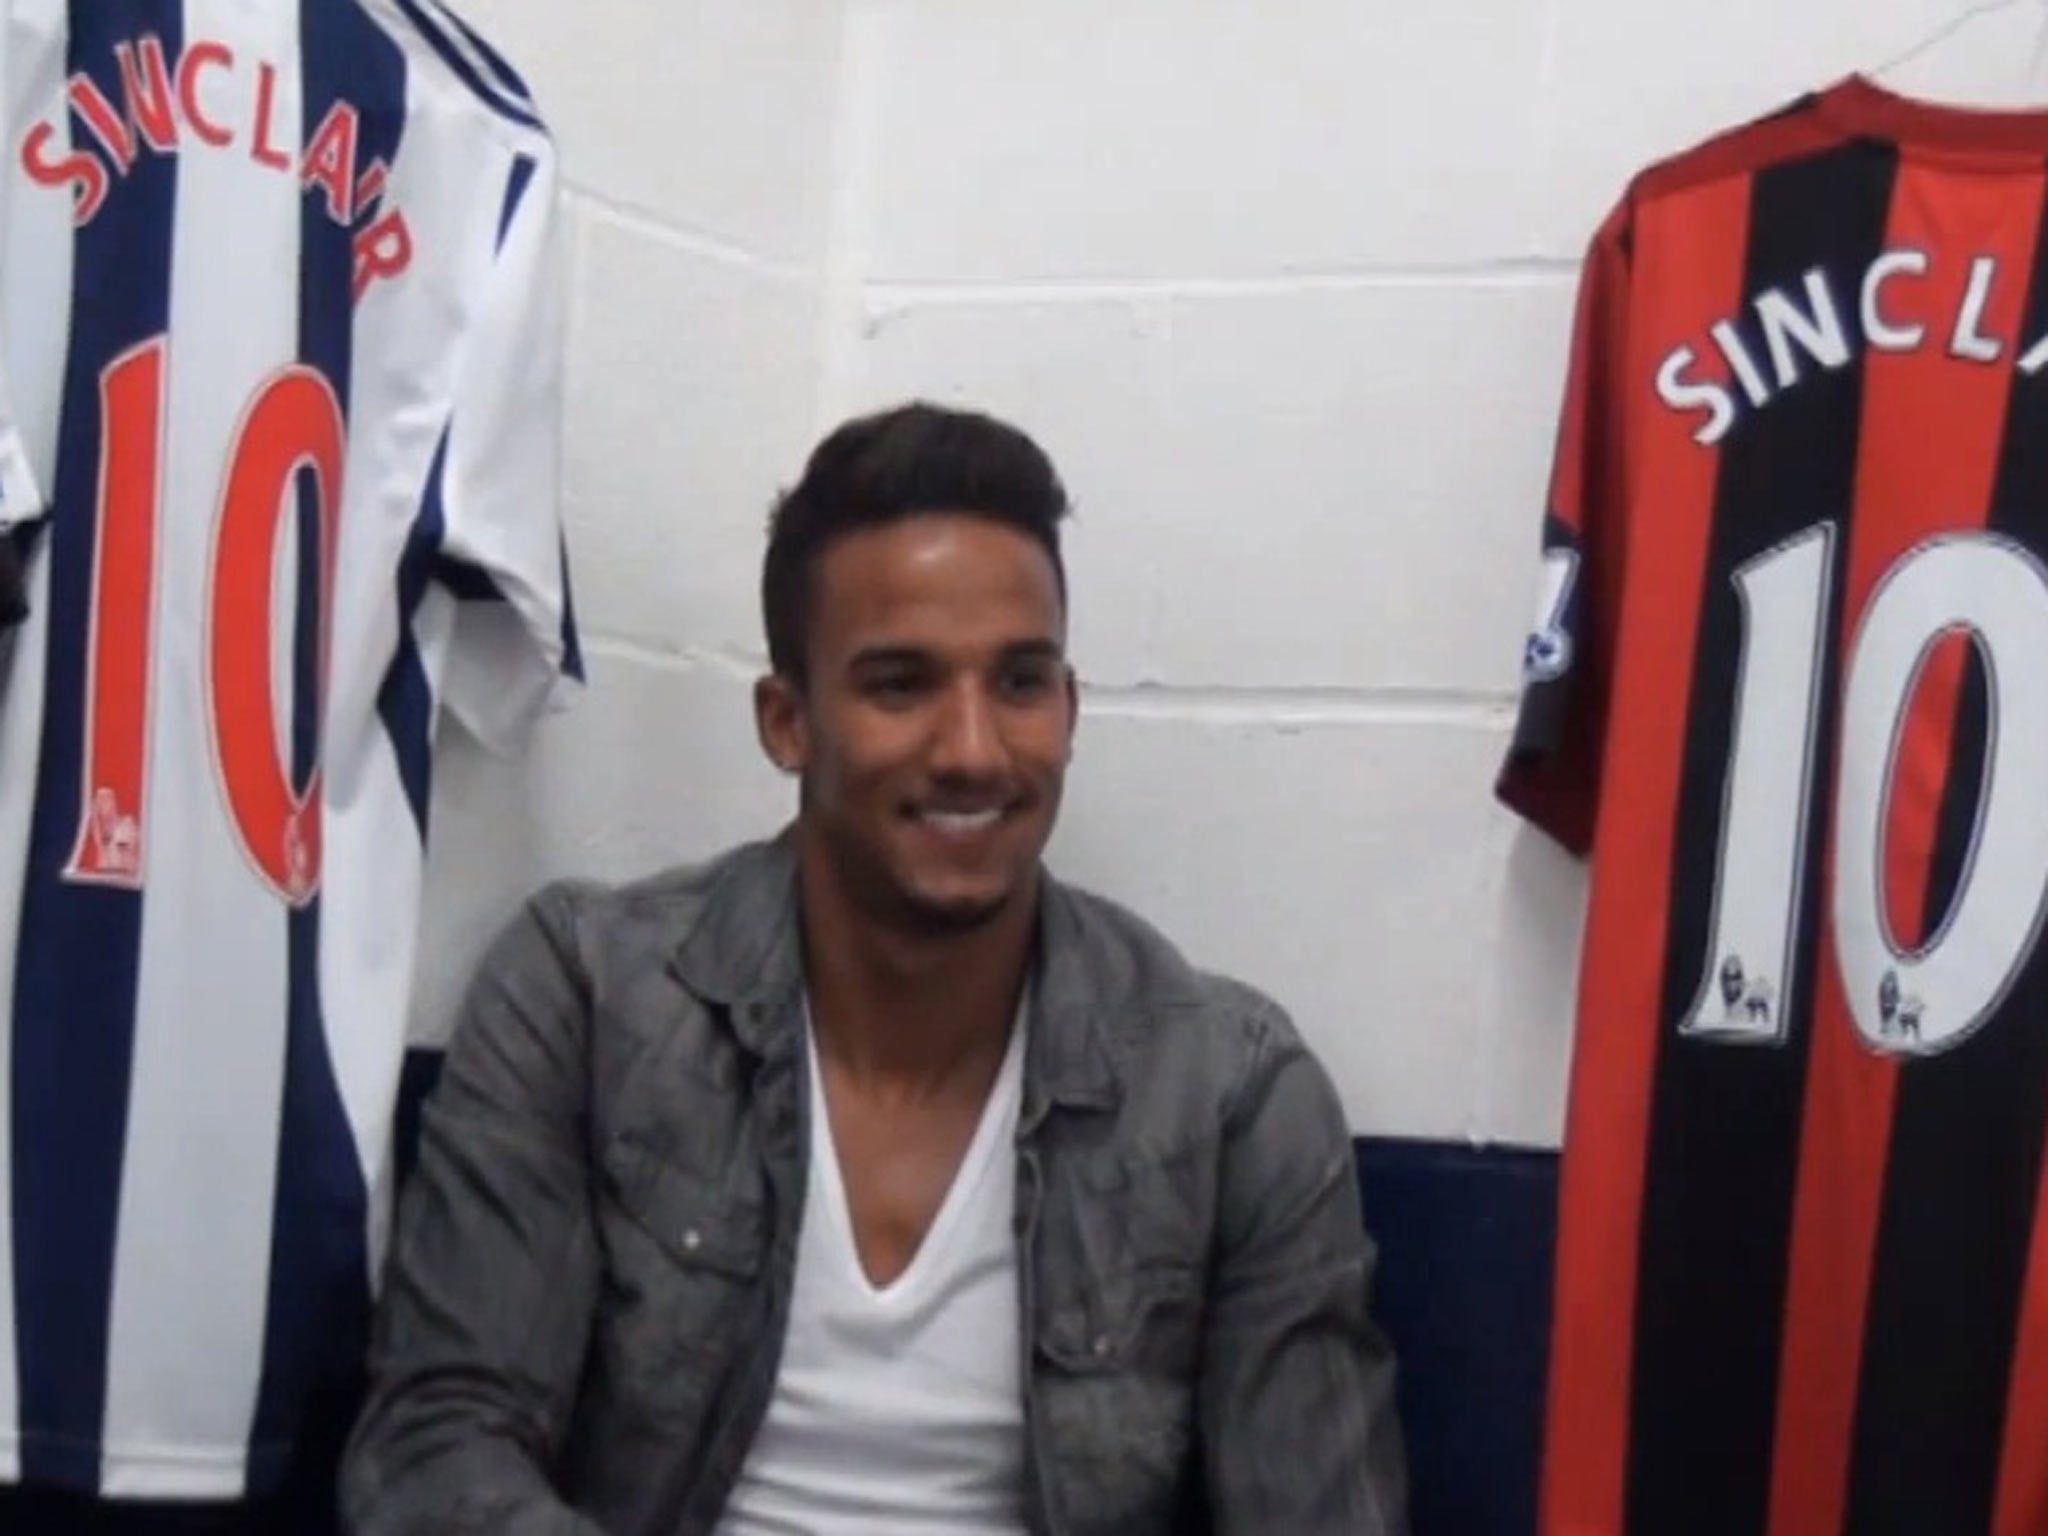 Scott Sinclair pictured with his new shirt